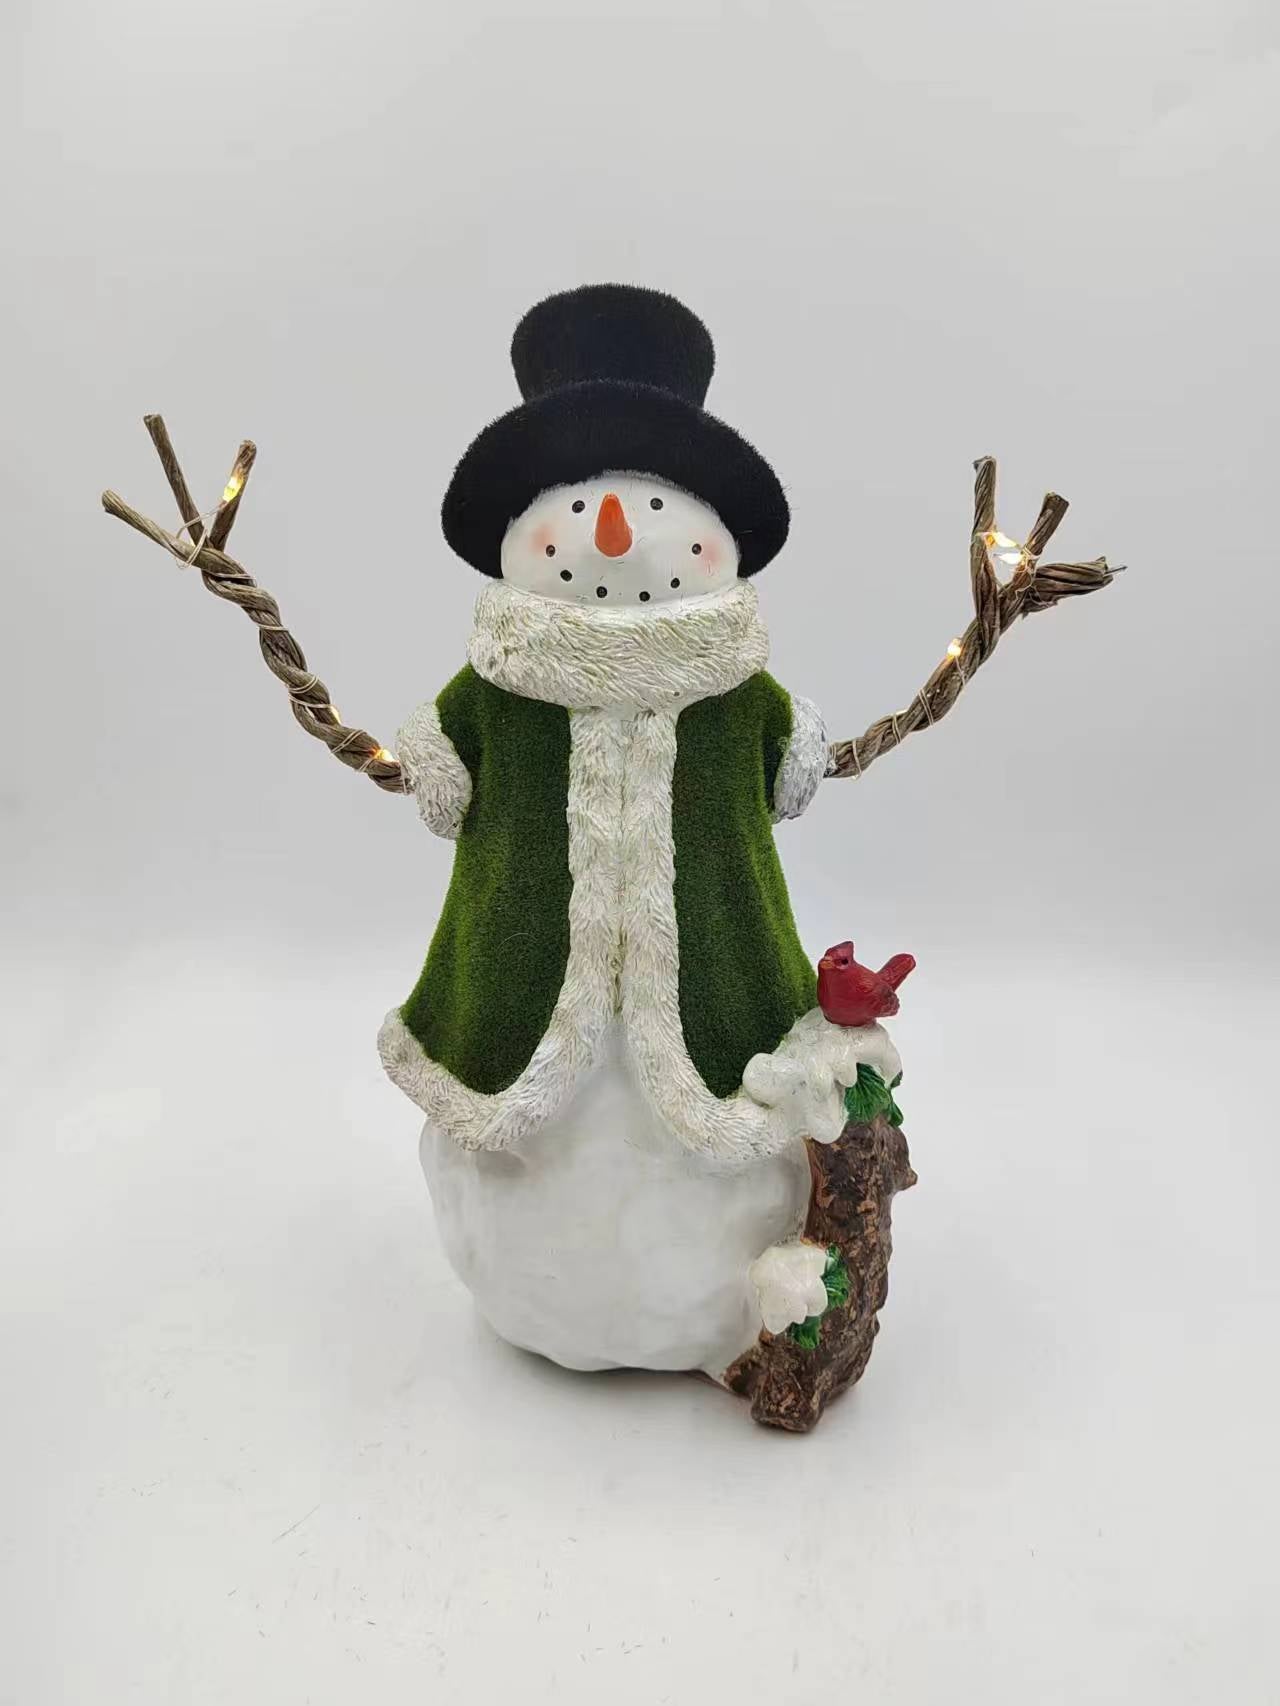 Christmas Snowmen Resin Ornaments: Festive Figurines for Holiday Party Home Decor and Thoughtful, Measuring 4.13 x 3.74 x 8.86 inches，Set of 2